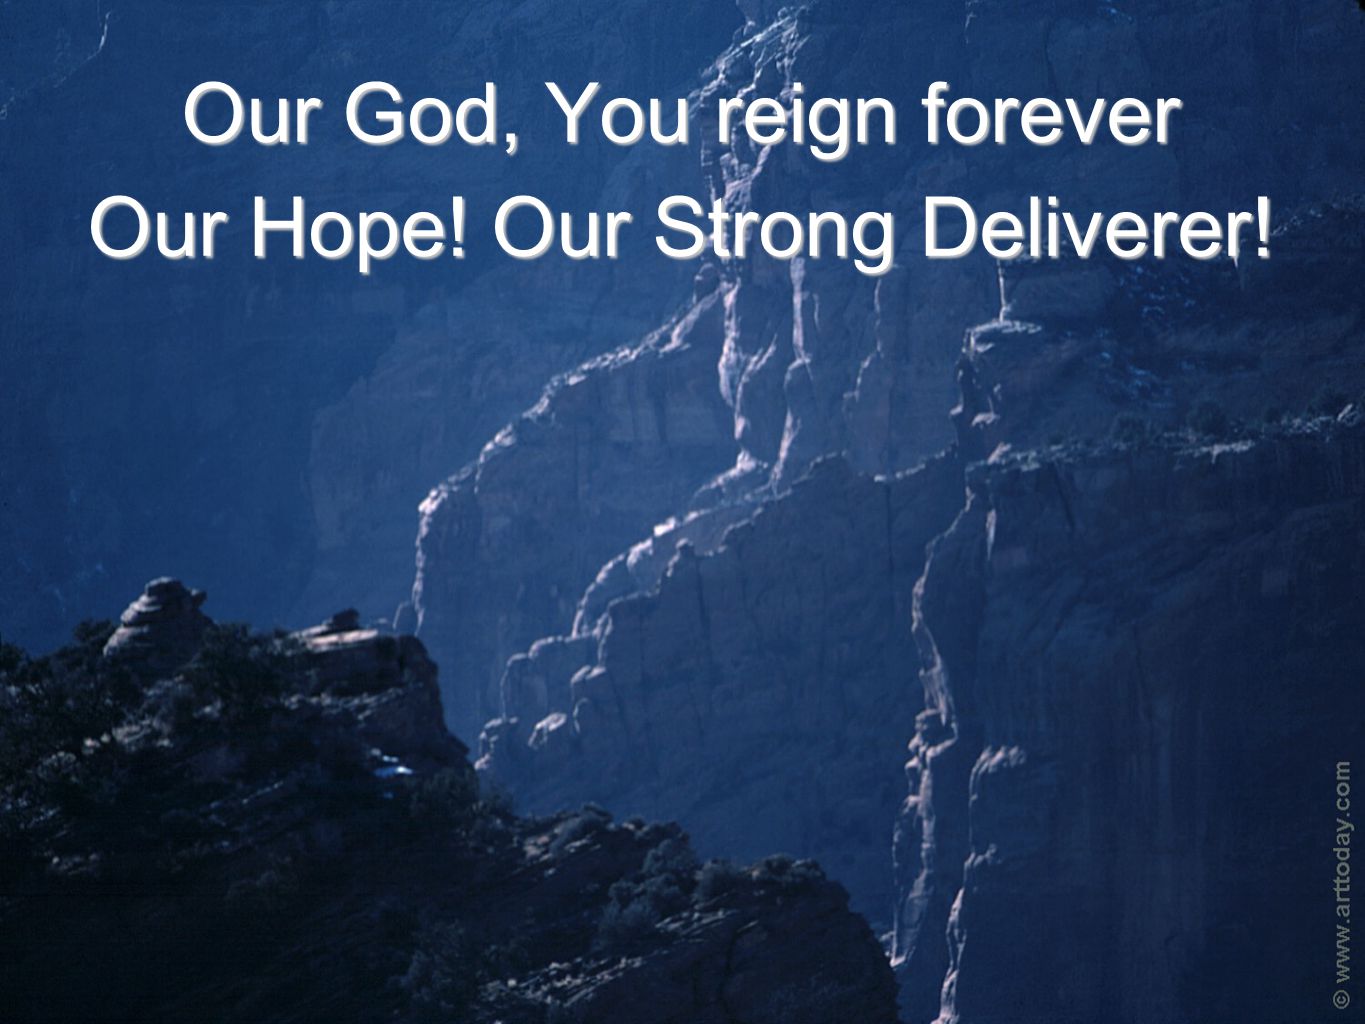 Our God, You reign forever Our Hope! Our Strong Deliverer!